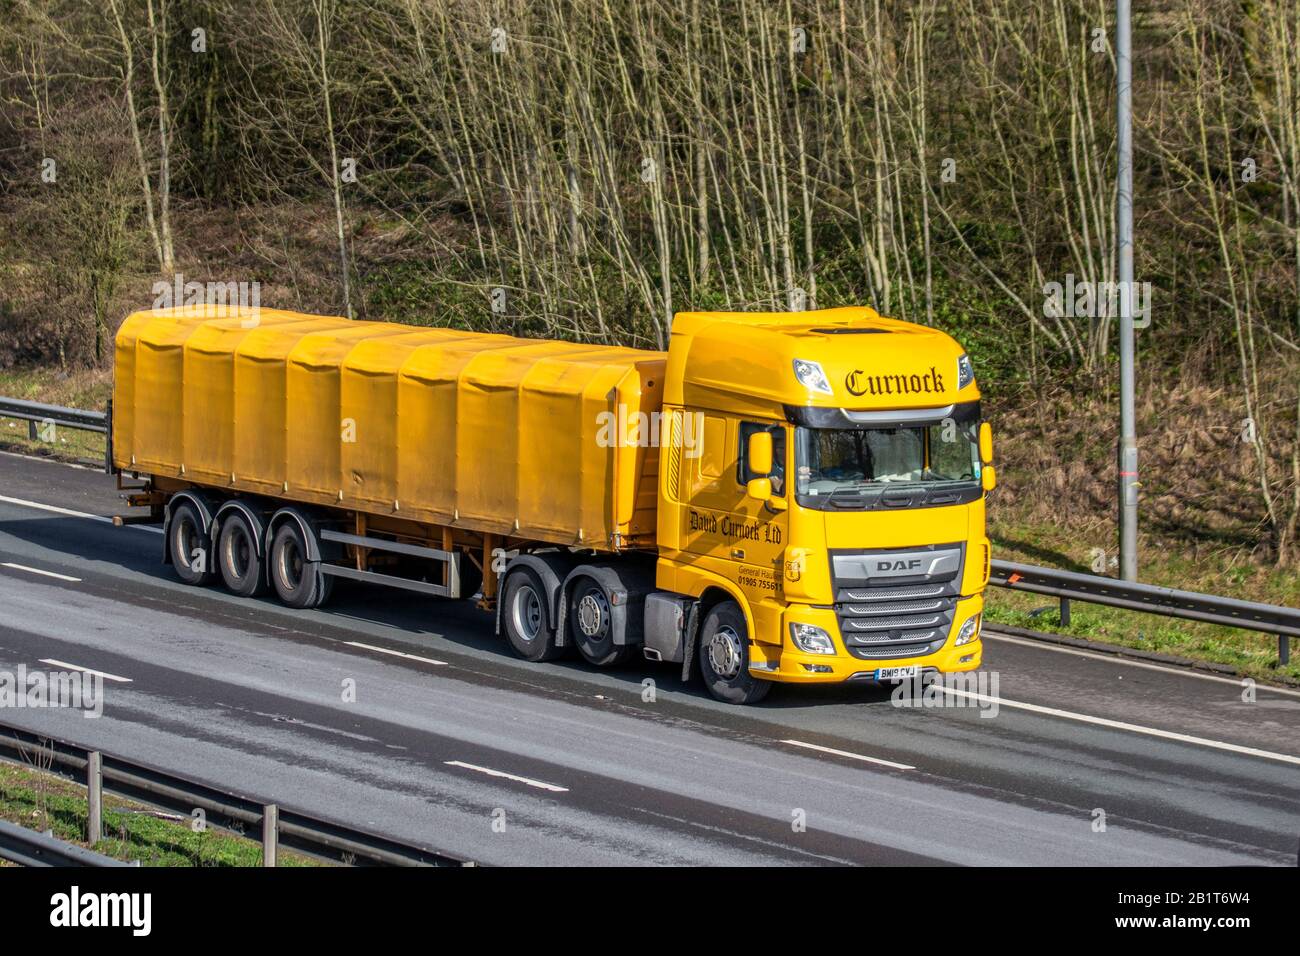 David Curnock Ltd yellow Haulage delivery trucks, lorry, transportation, truck, cargo carrier, DAF vehicle, commercial transport, industry, M61 at Manchester, UK Stock Photo